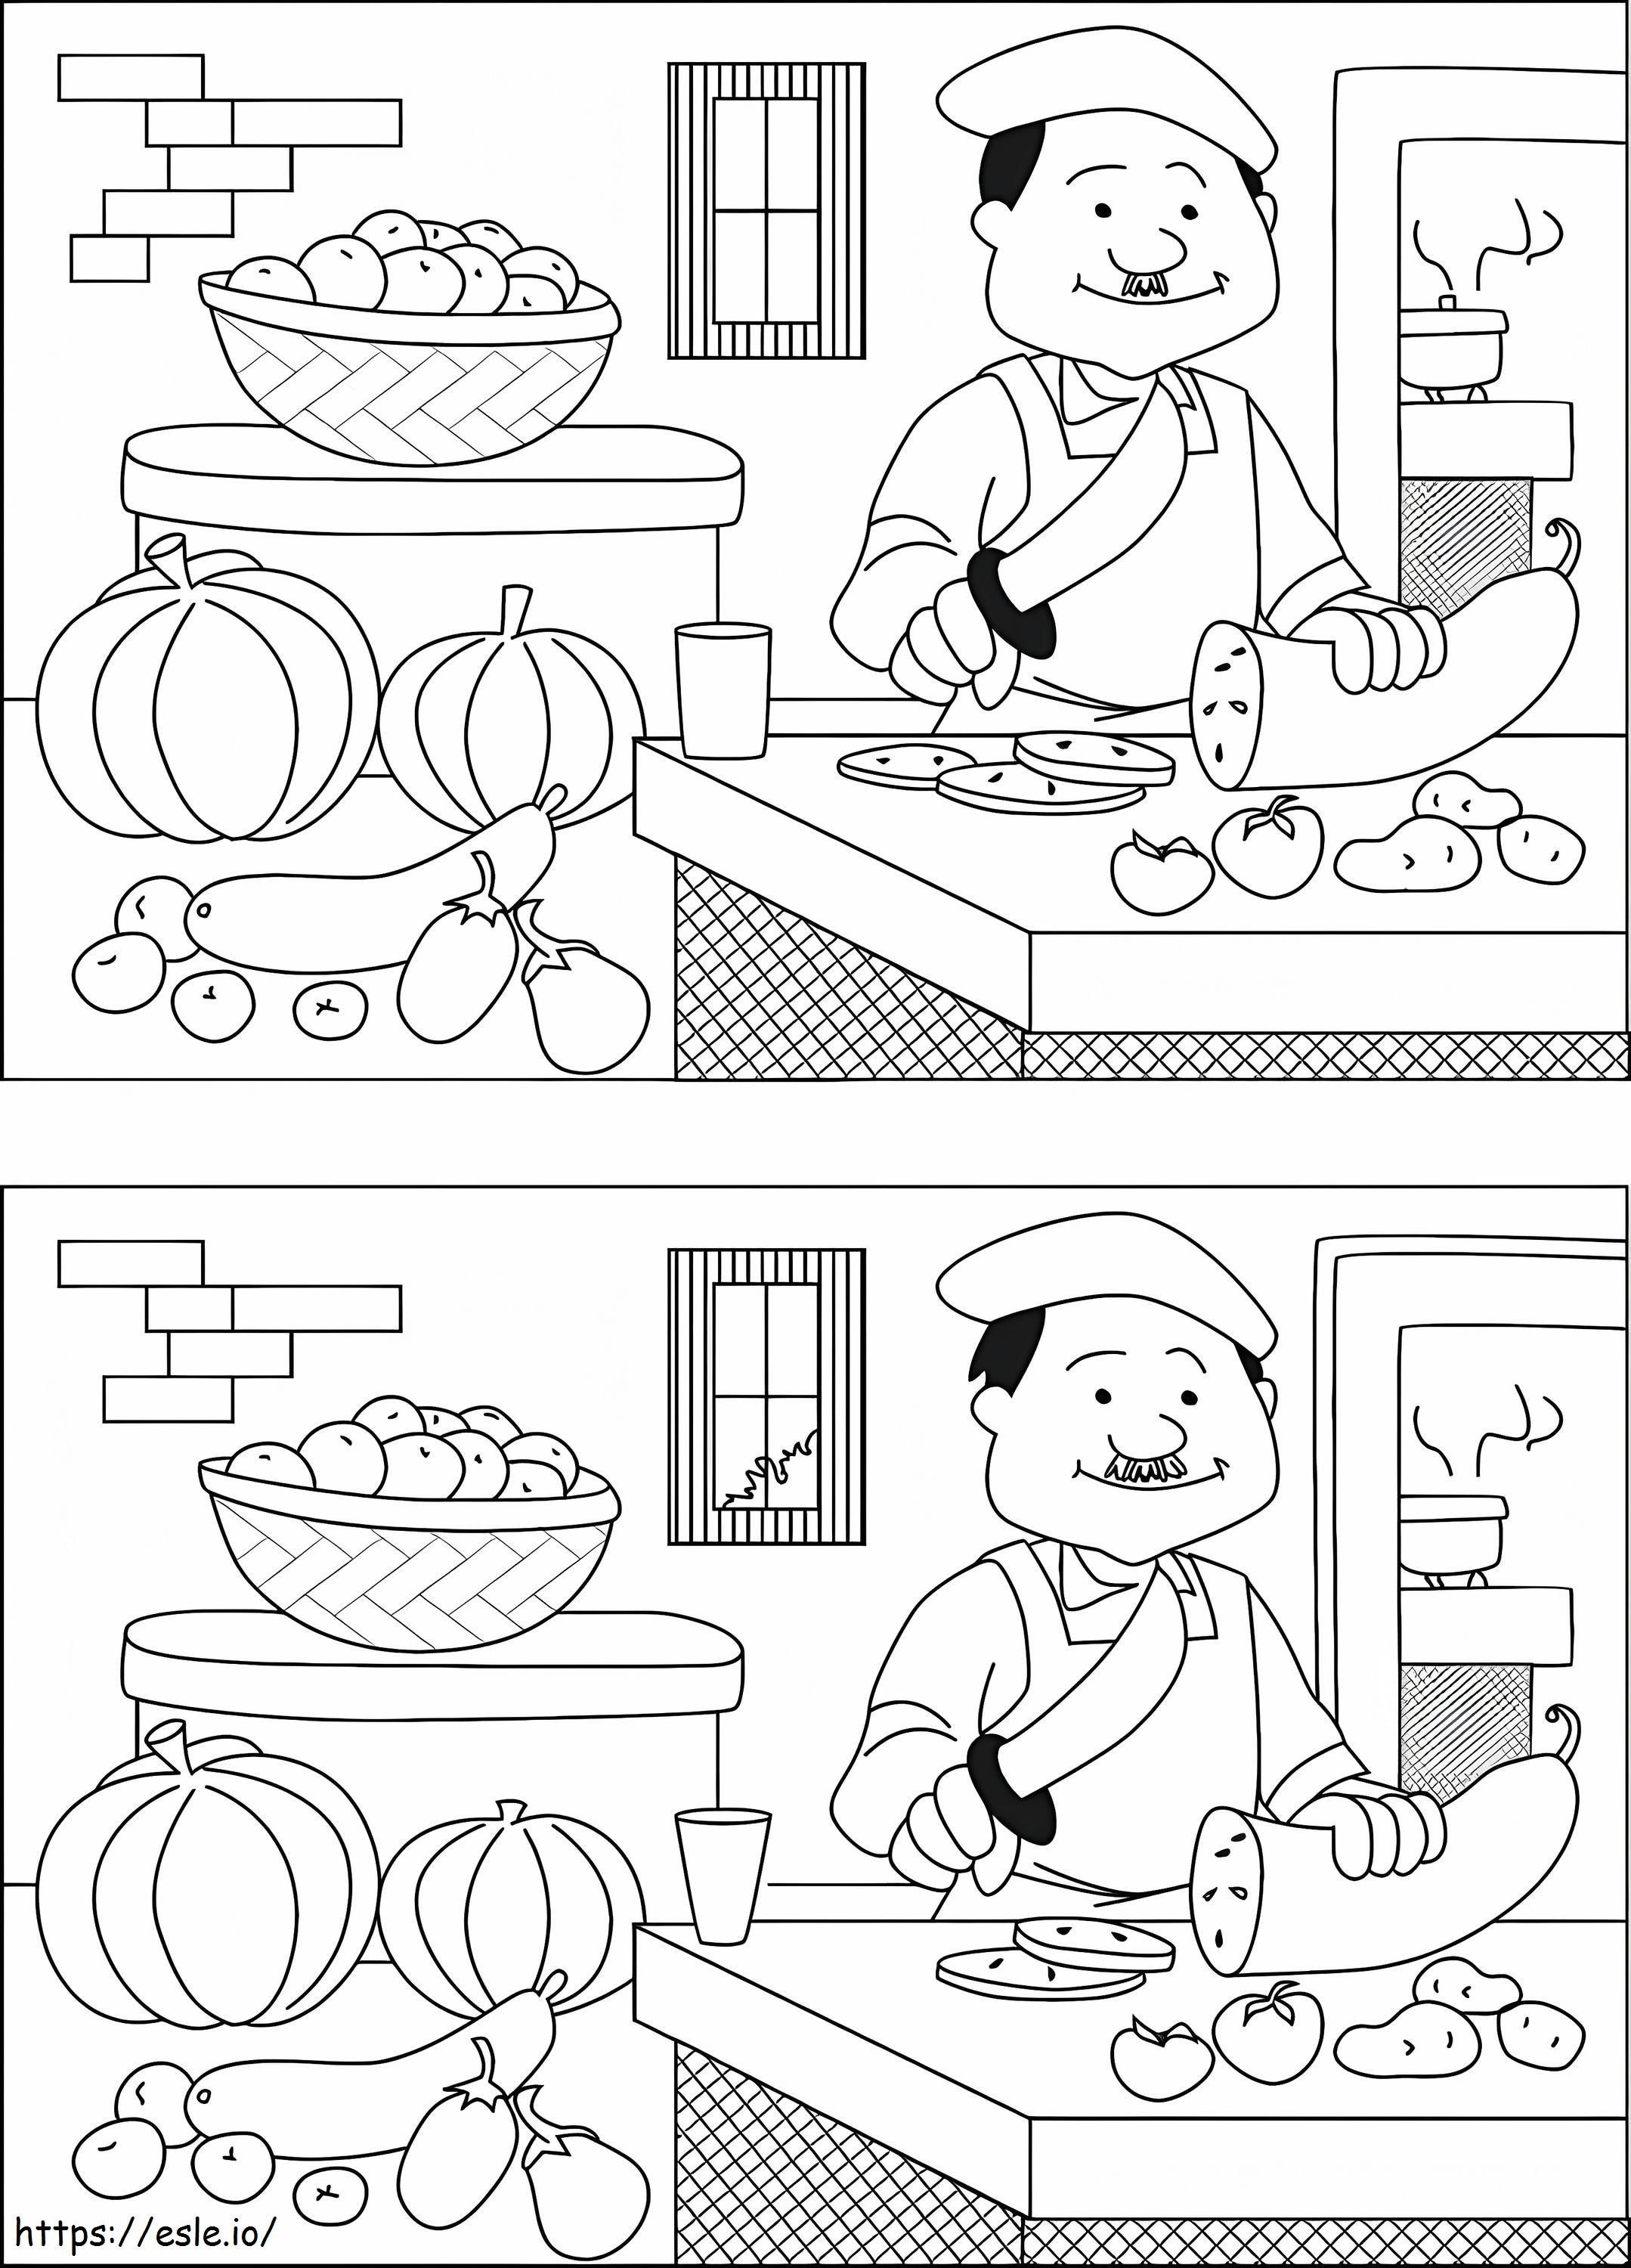 Printable Find The Difference coloring page